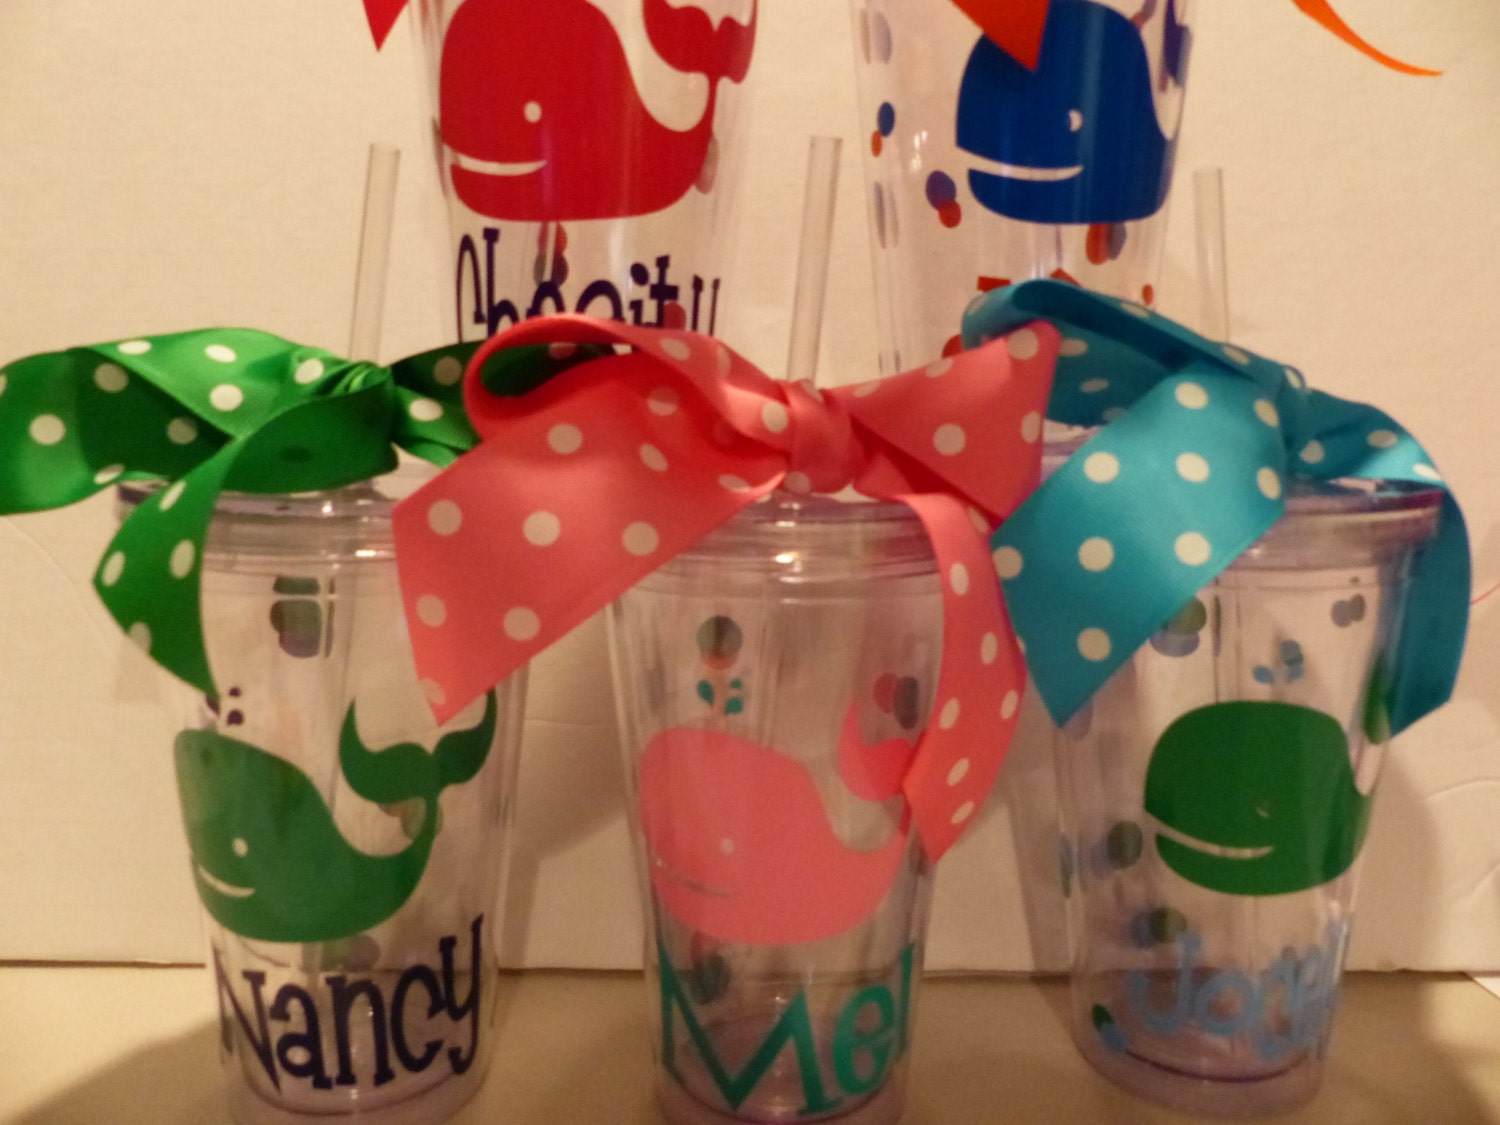 Personalized Tumblers - Kids Cups, birthday gifts, favors, goody bag